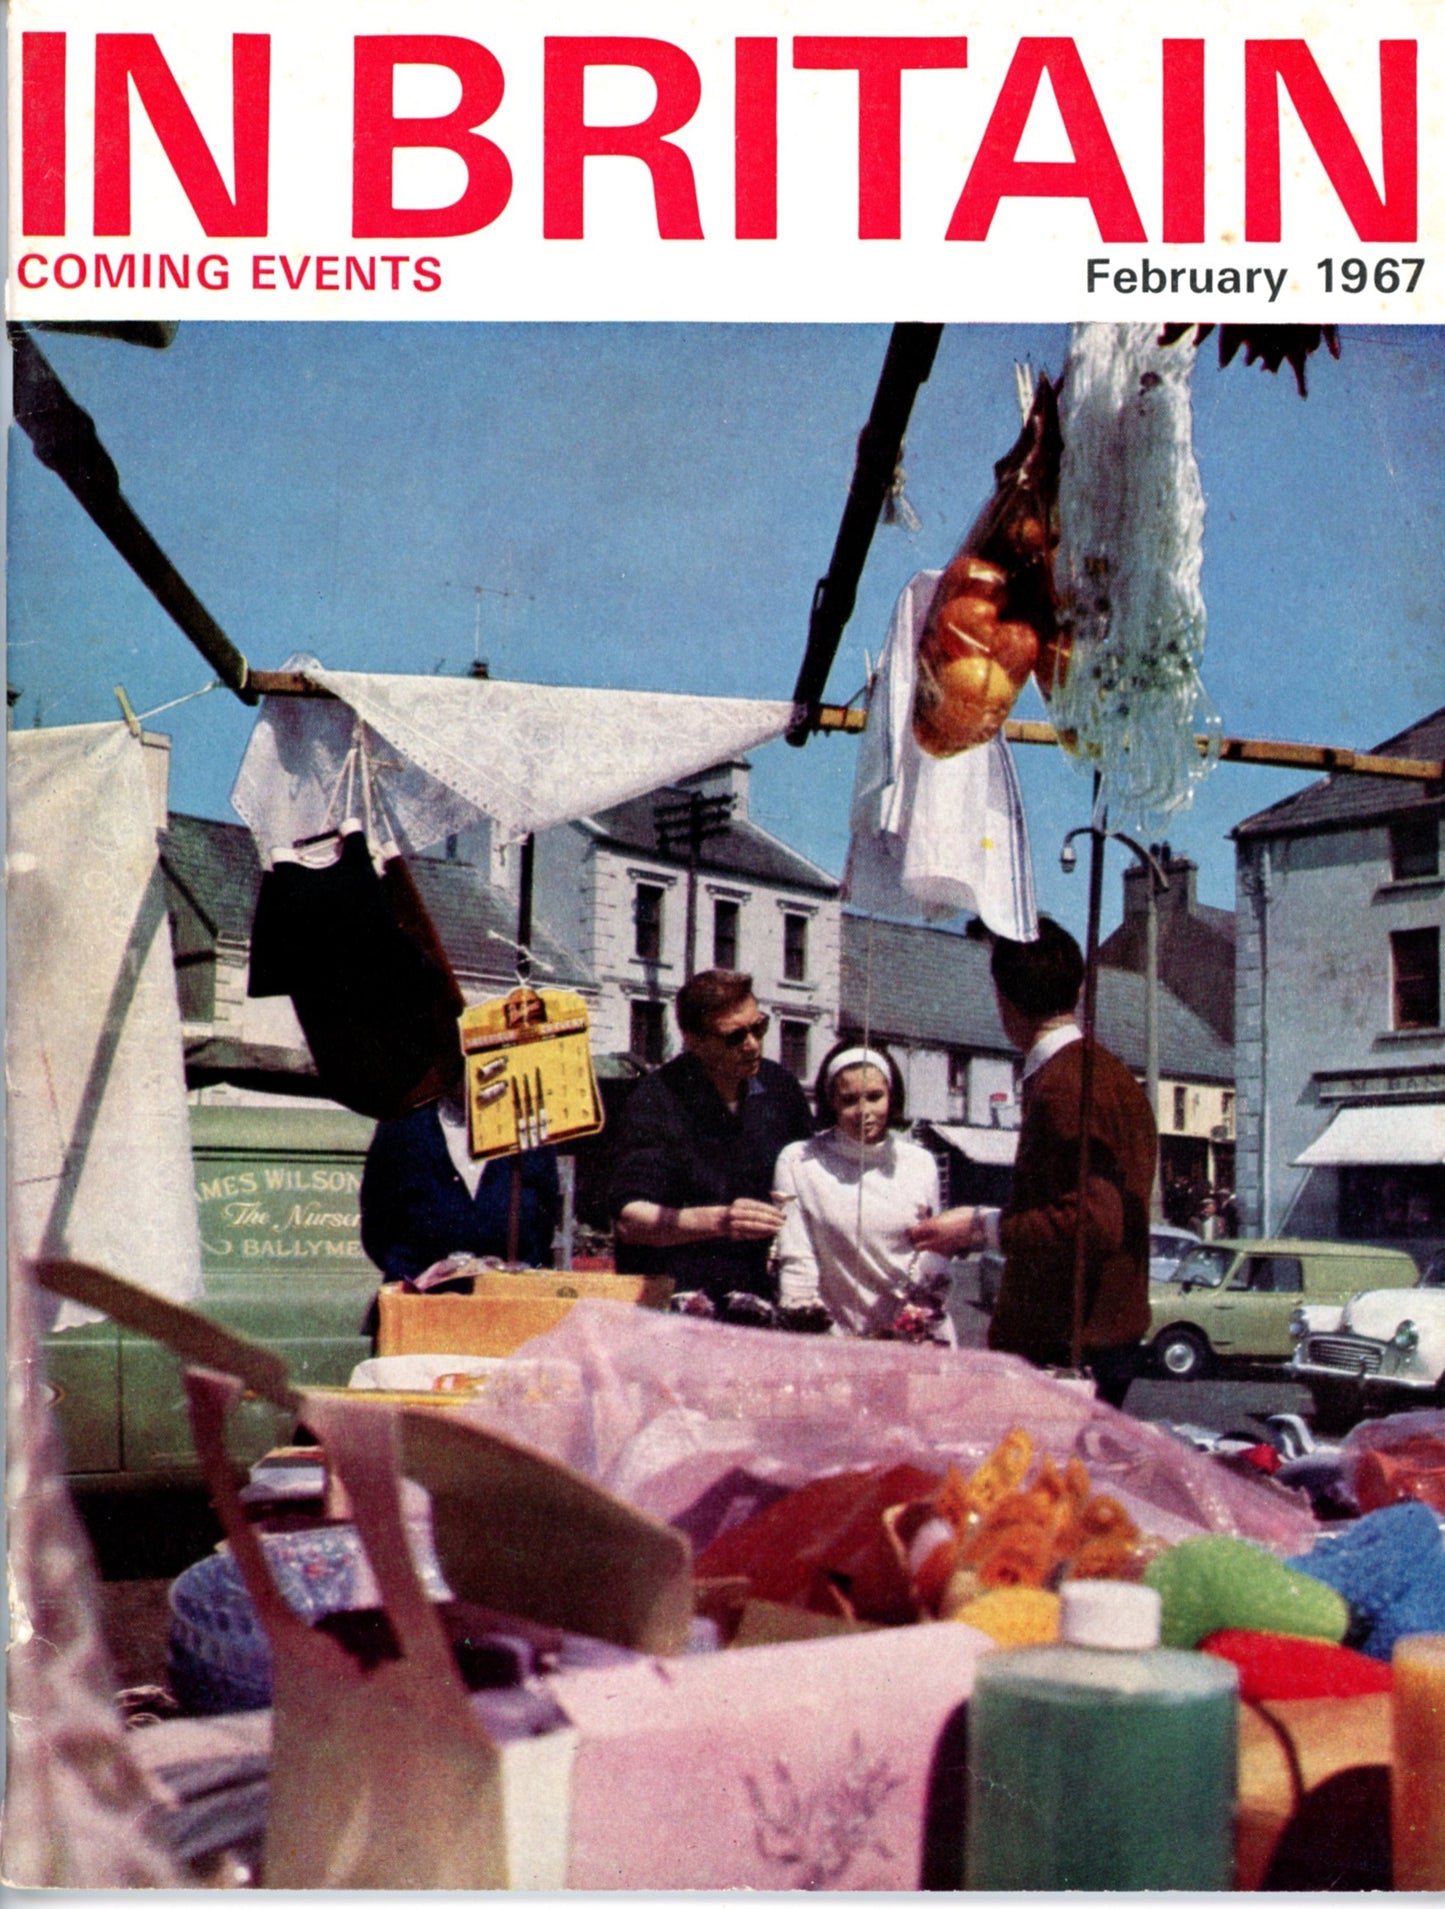 COMING EVENTS IN BRITAIN Vintage Travel Magazines Single Issues © February 1967